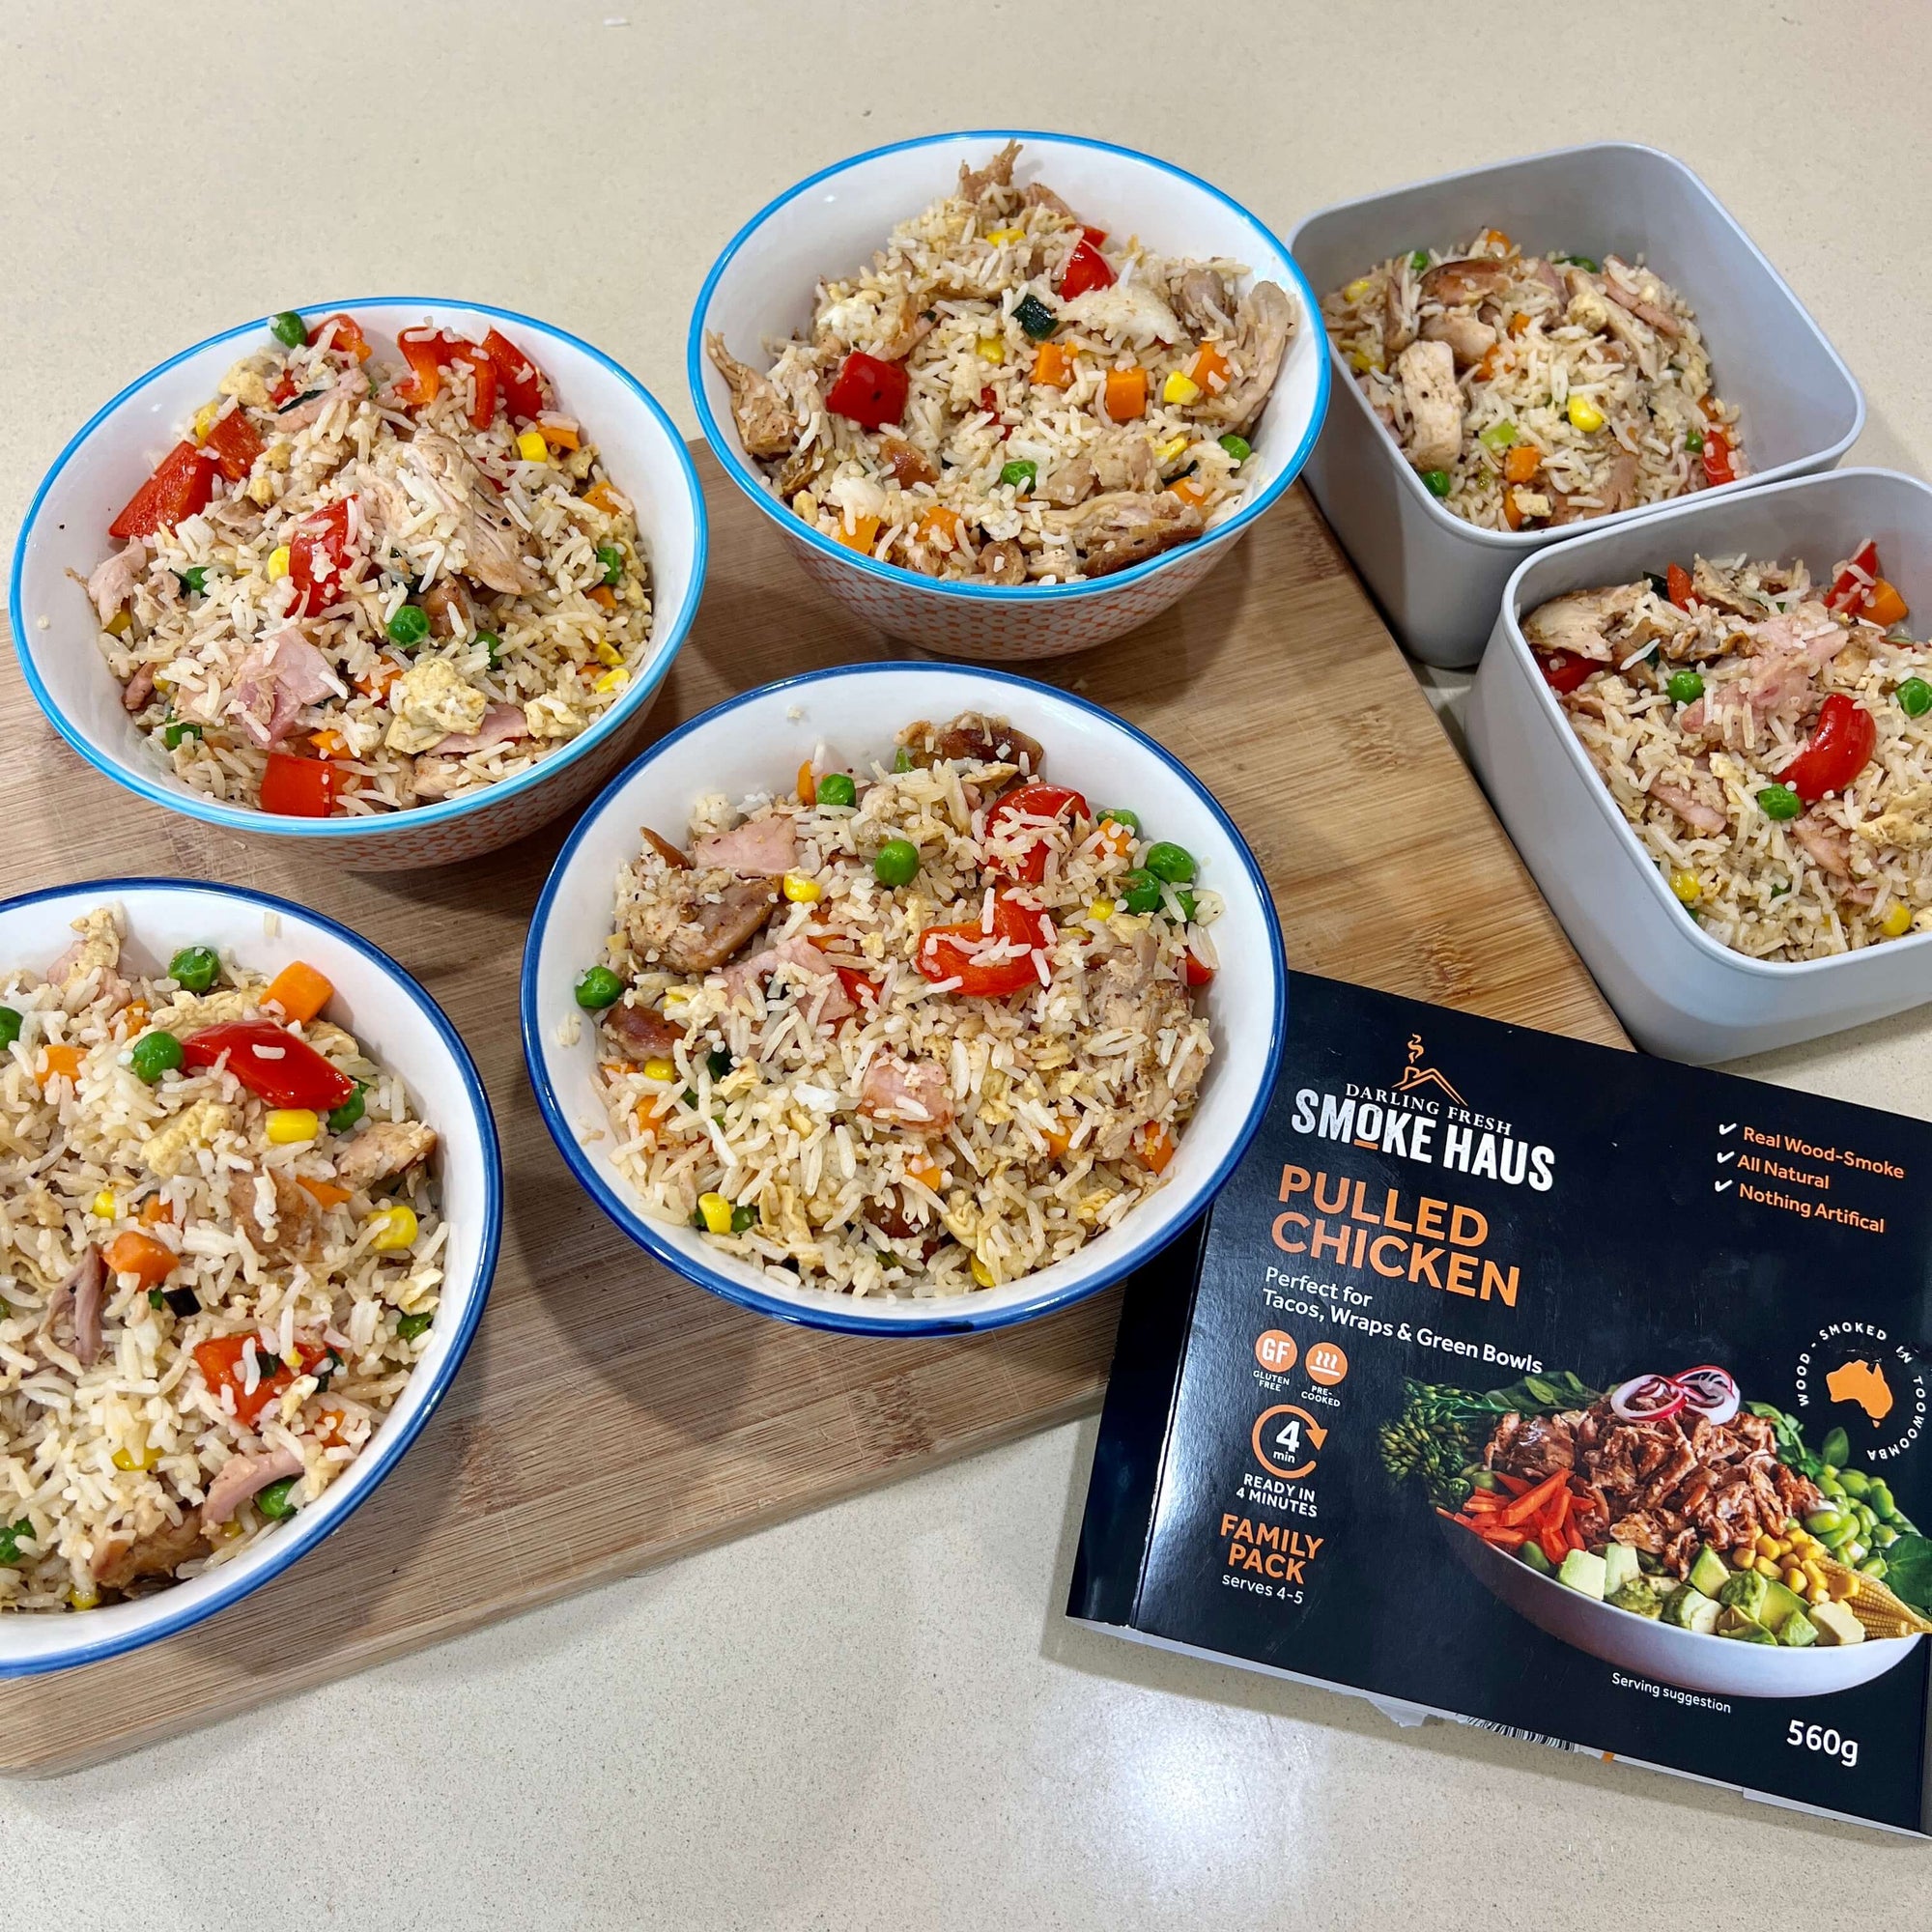 Pulled Chicken Fried Rice: Dinner plus 6 lunches at $3.65 per serve!